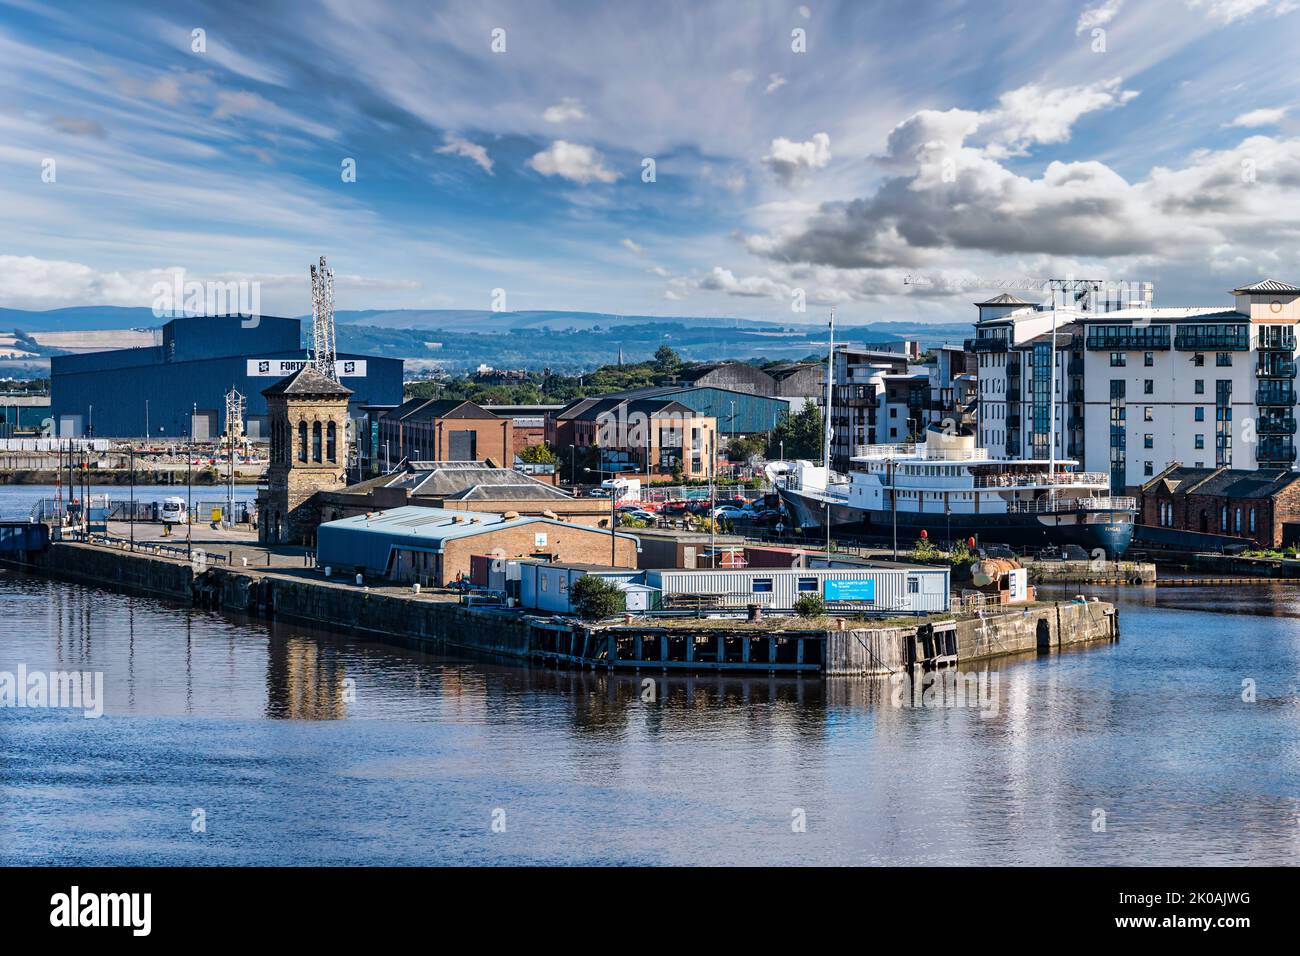 View over Leith Harbour dockland with Forth Ports Big Blue Shed & Fingal floating hotel ship, Edinburgh, Scotland, UK Stock Photo